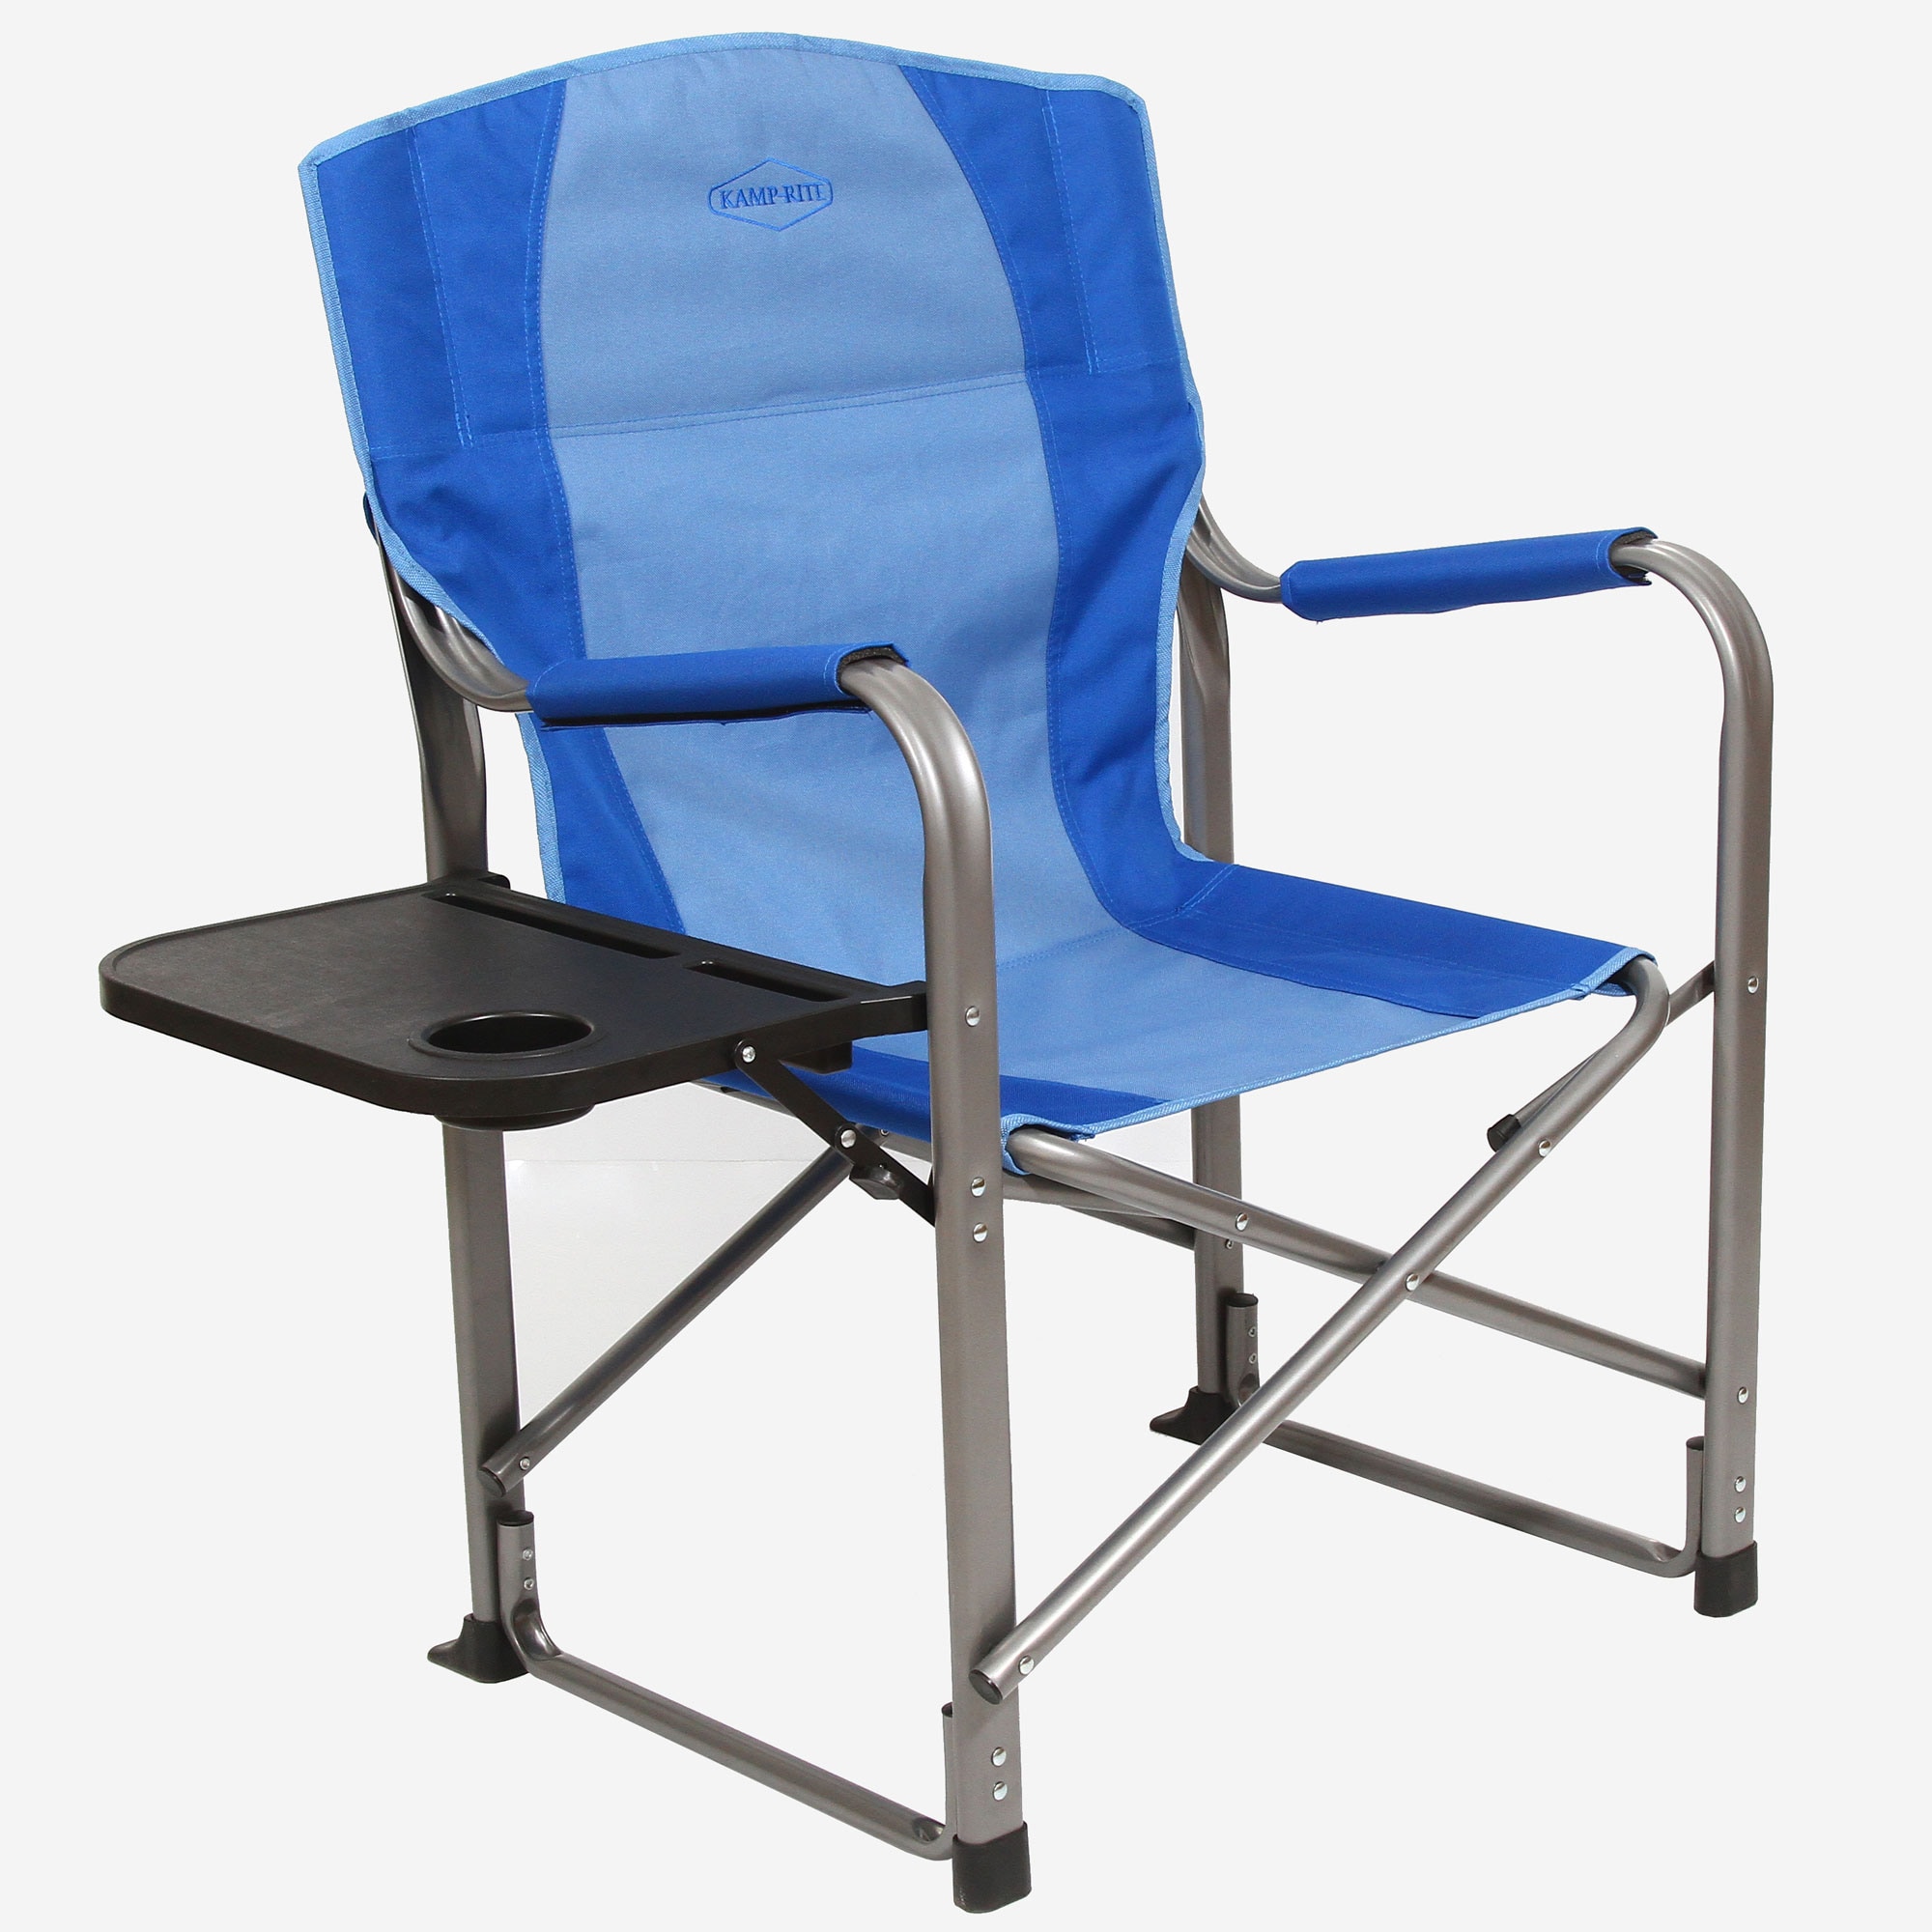 Heavy Duty Padded Folding Camping Directors Chair with Cup Holder Portable blue 